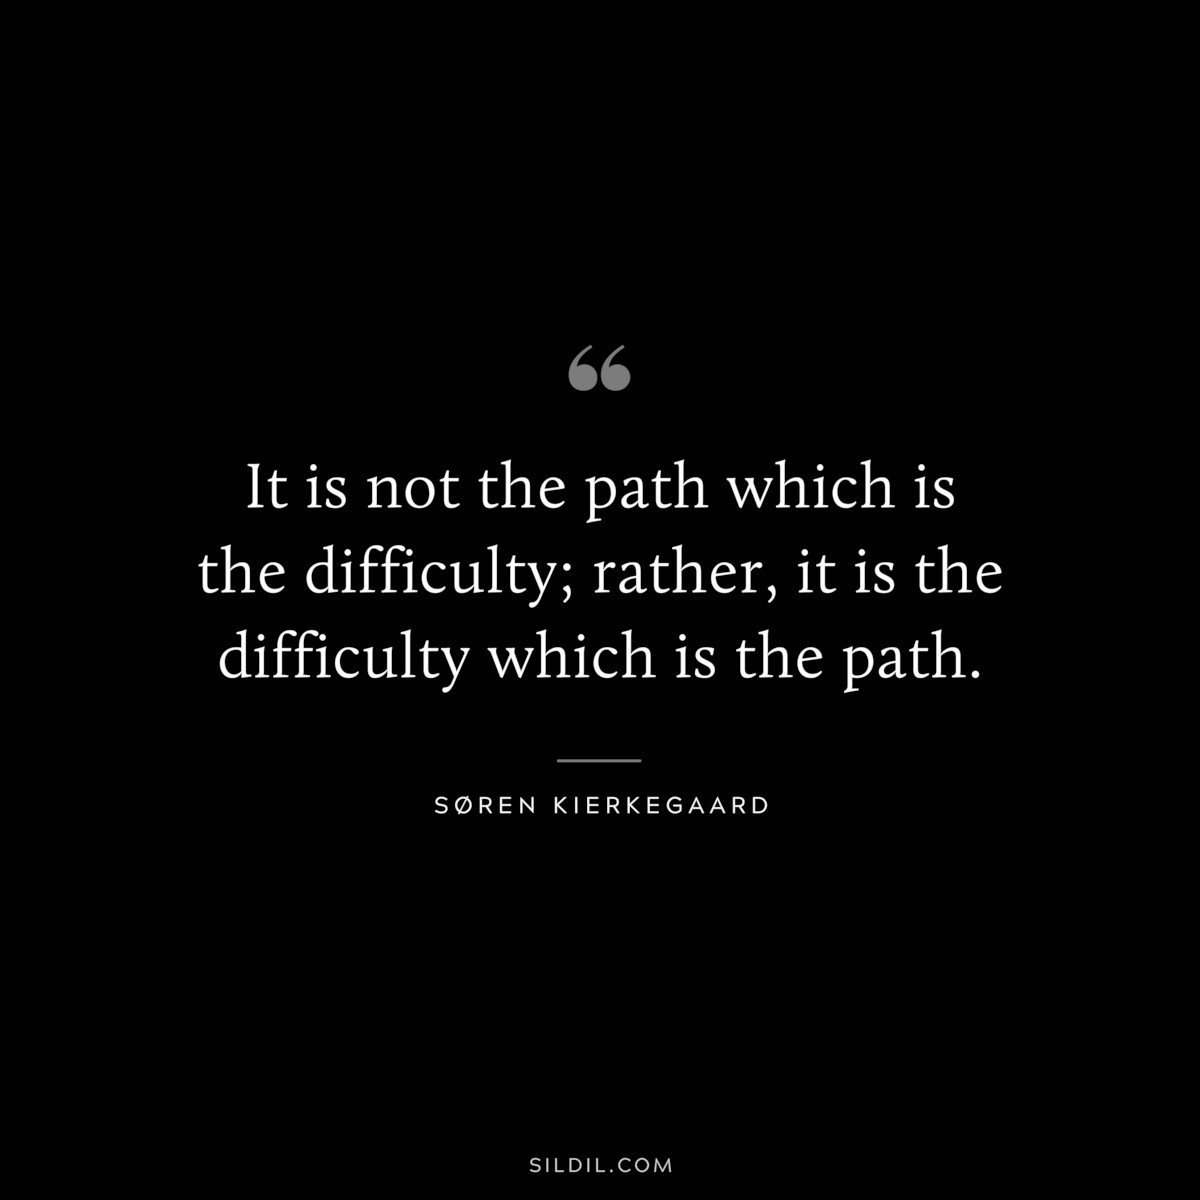 It is not the path which is the difficulty; rather, it is the difficulty which is the path. ― Søren Kierkegaard